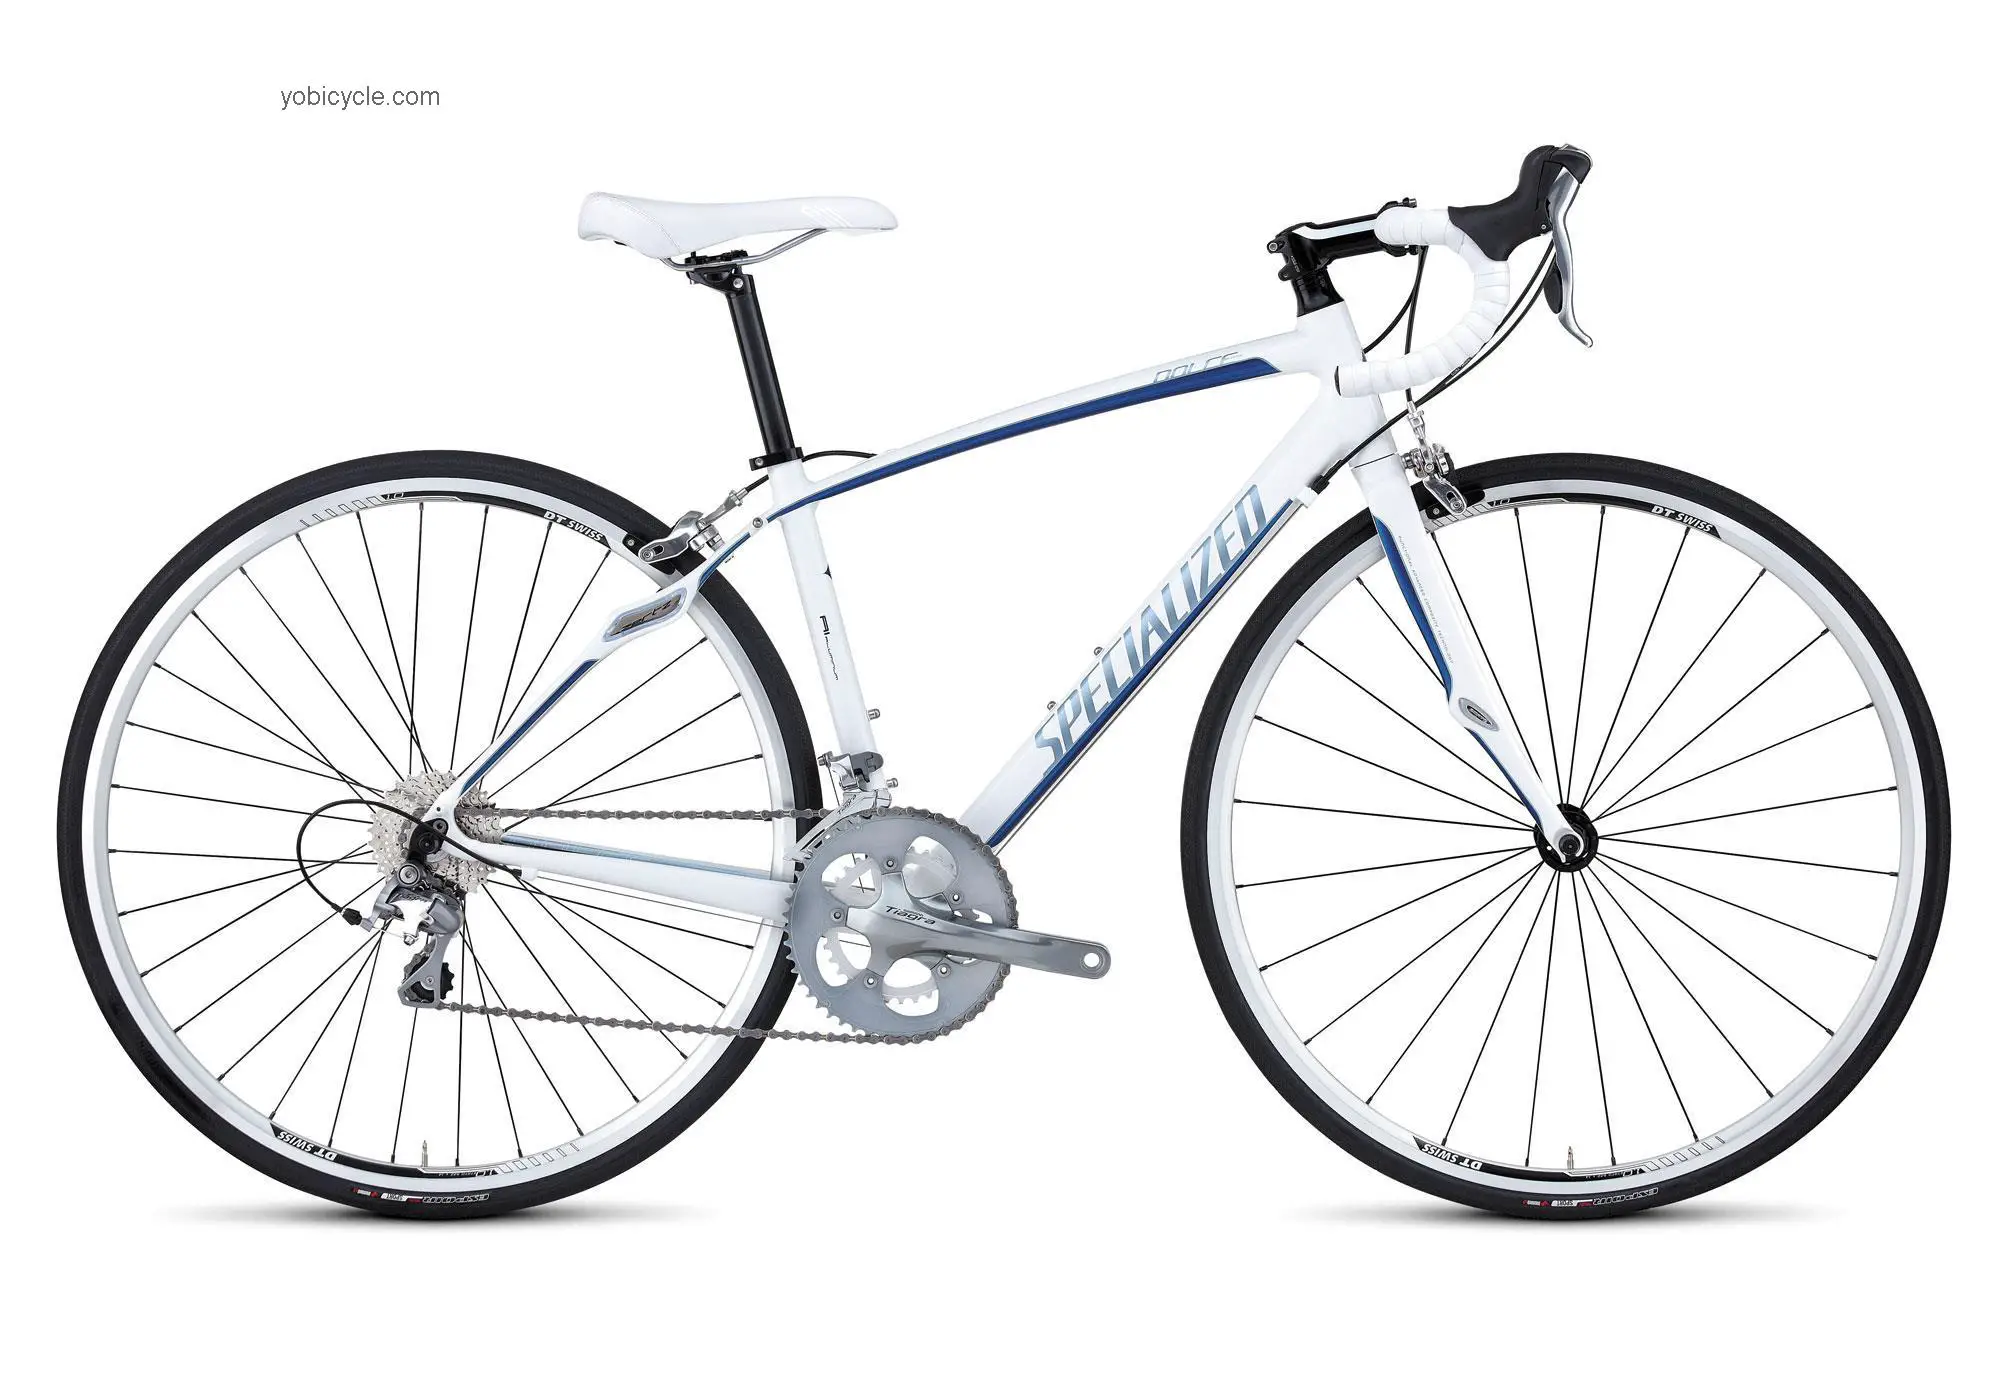 Specialized Dolce Elite Compact 2012 comparison online with competitors